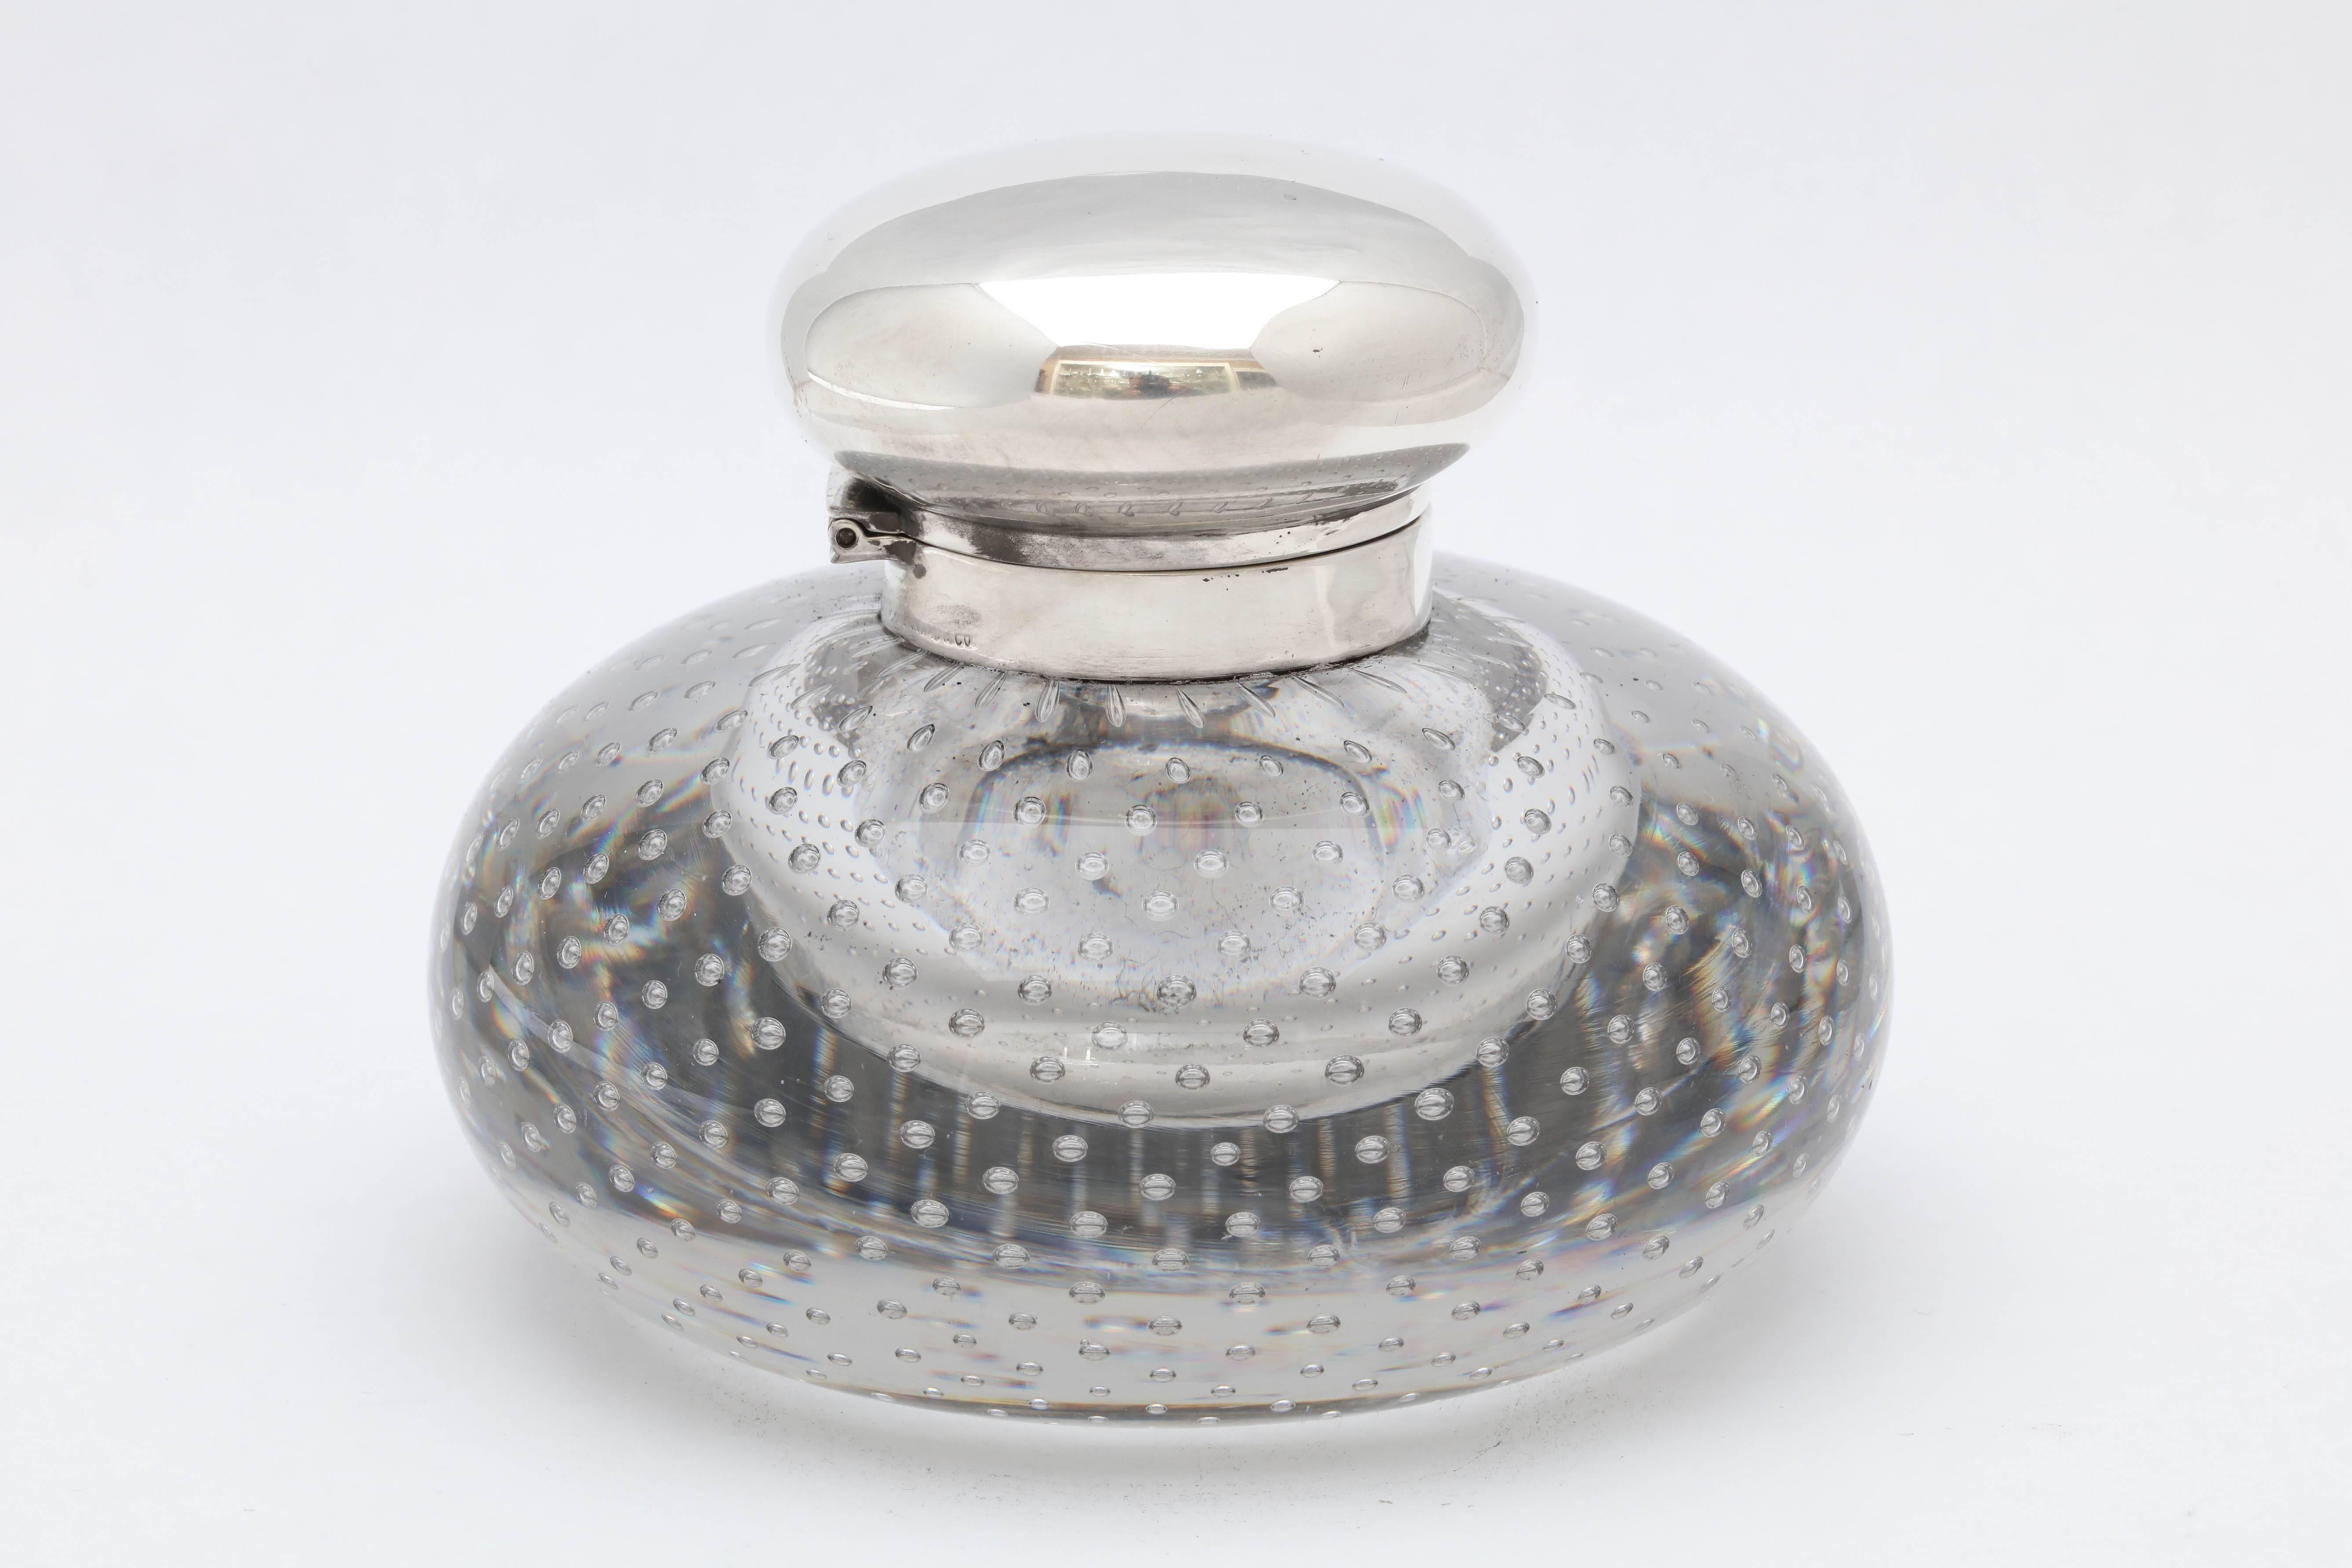 Large, Victorian period, sterling silver-mounted controlled bubbles crystal inkwell with hinged lid, Boston, circa 1895, Bigleow ,Kennard and Co. makers. Measures: 3 3/4 inches high x 4 1/4 inches diameter at widest point. Very heavy - weighs over 2